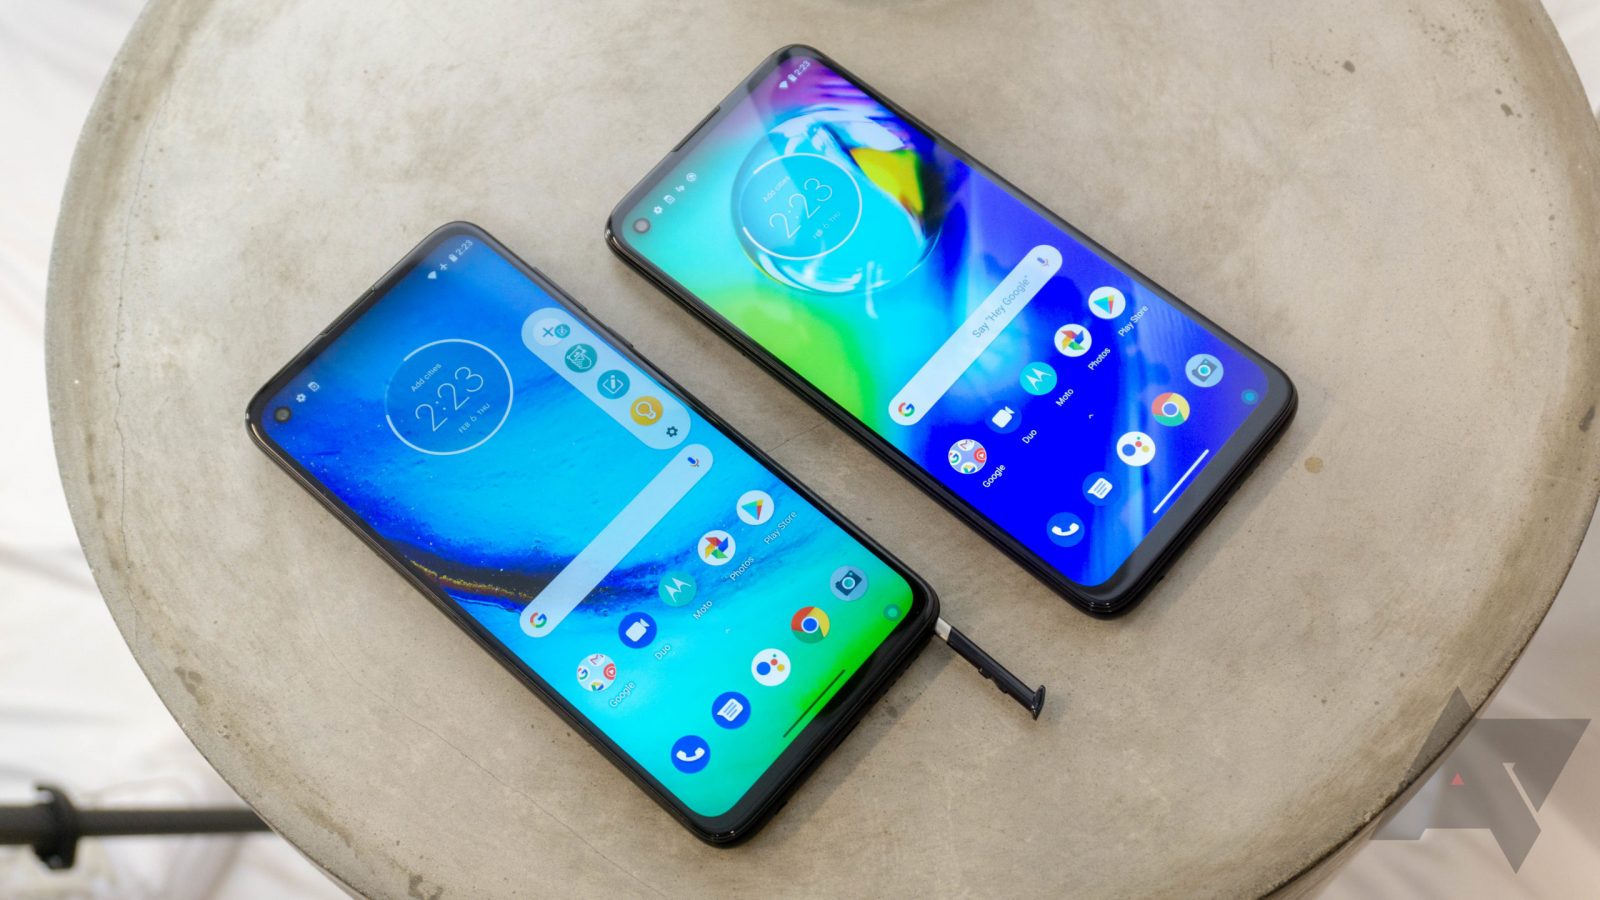 Motorola is back for 2020! Moto G Stylus is coming with